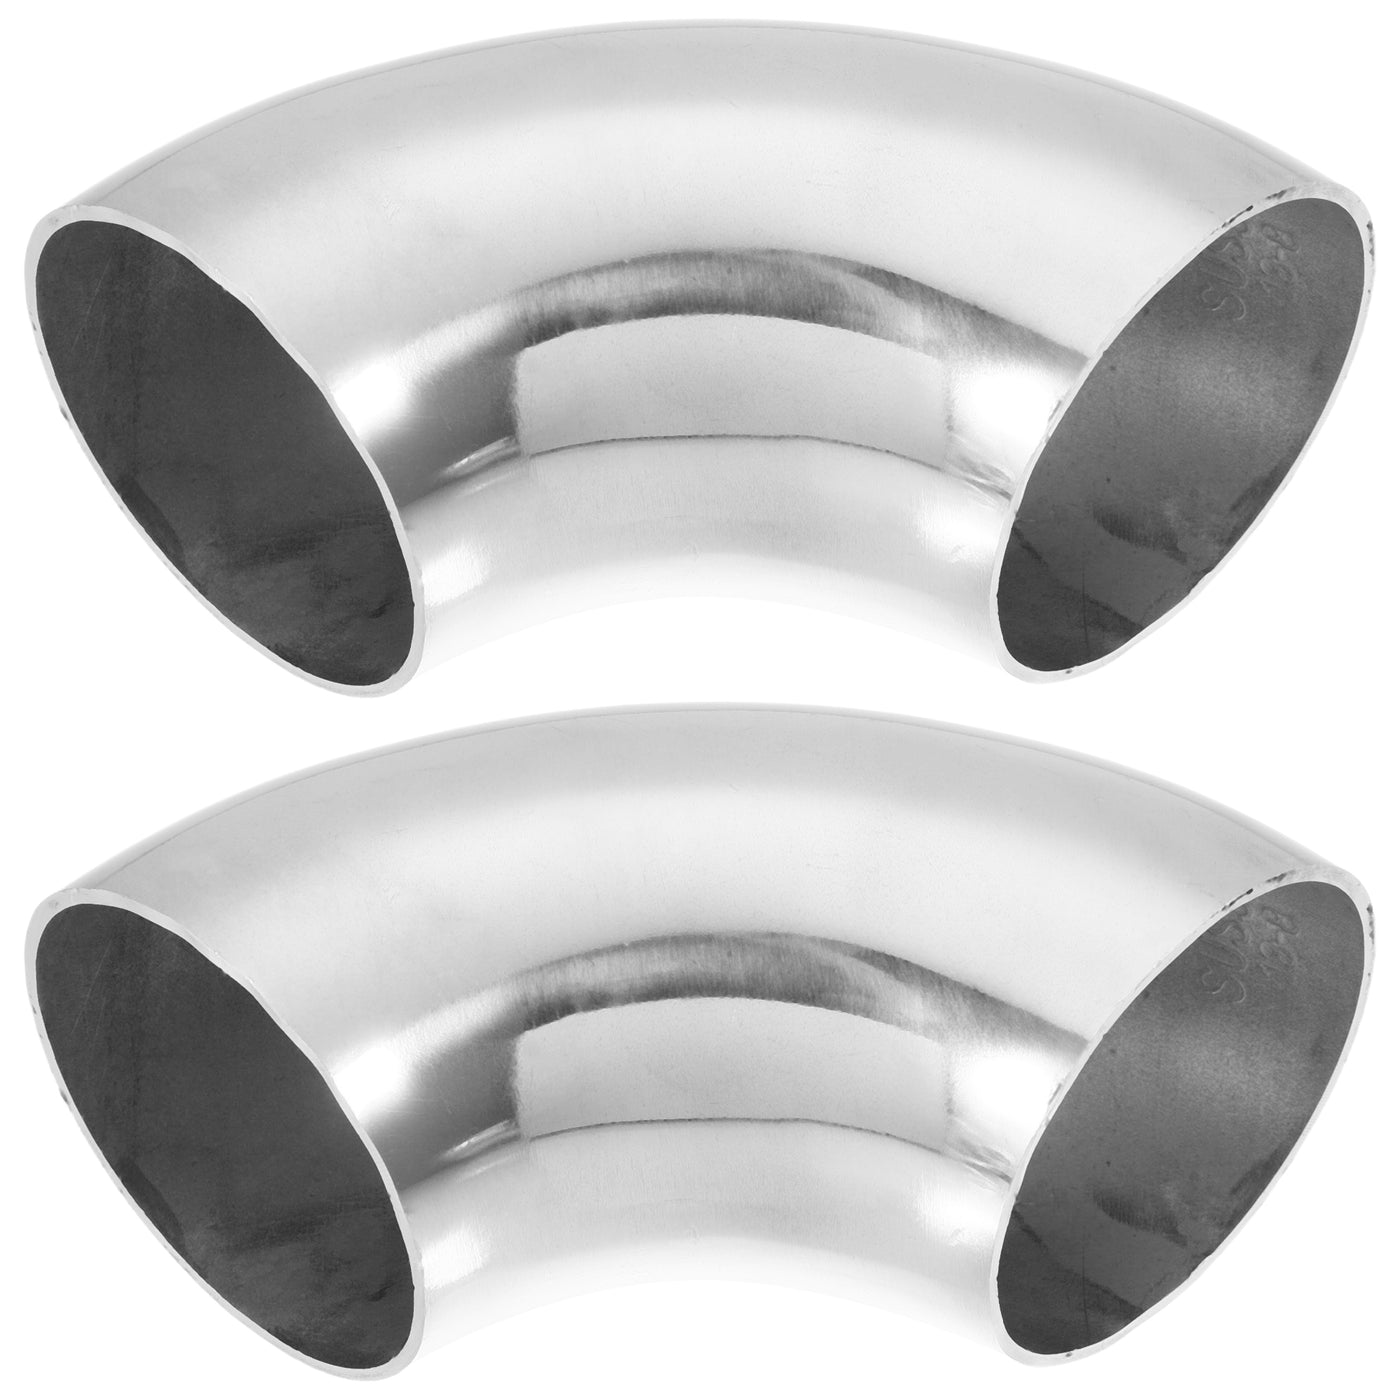 uxcell Uxcell 2pcs 90 Degree SS304 Stainless Steel Bend Tube Exhaust Elbow Pipe for Car Modified Exhaust System 0.06" Wall Thickness Piping Silver Tone